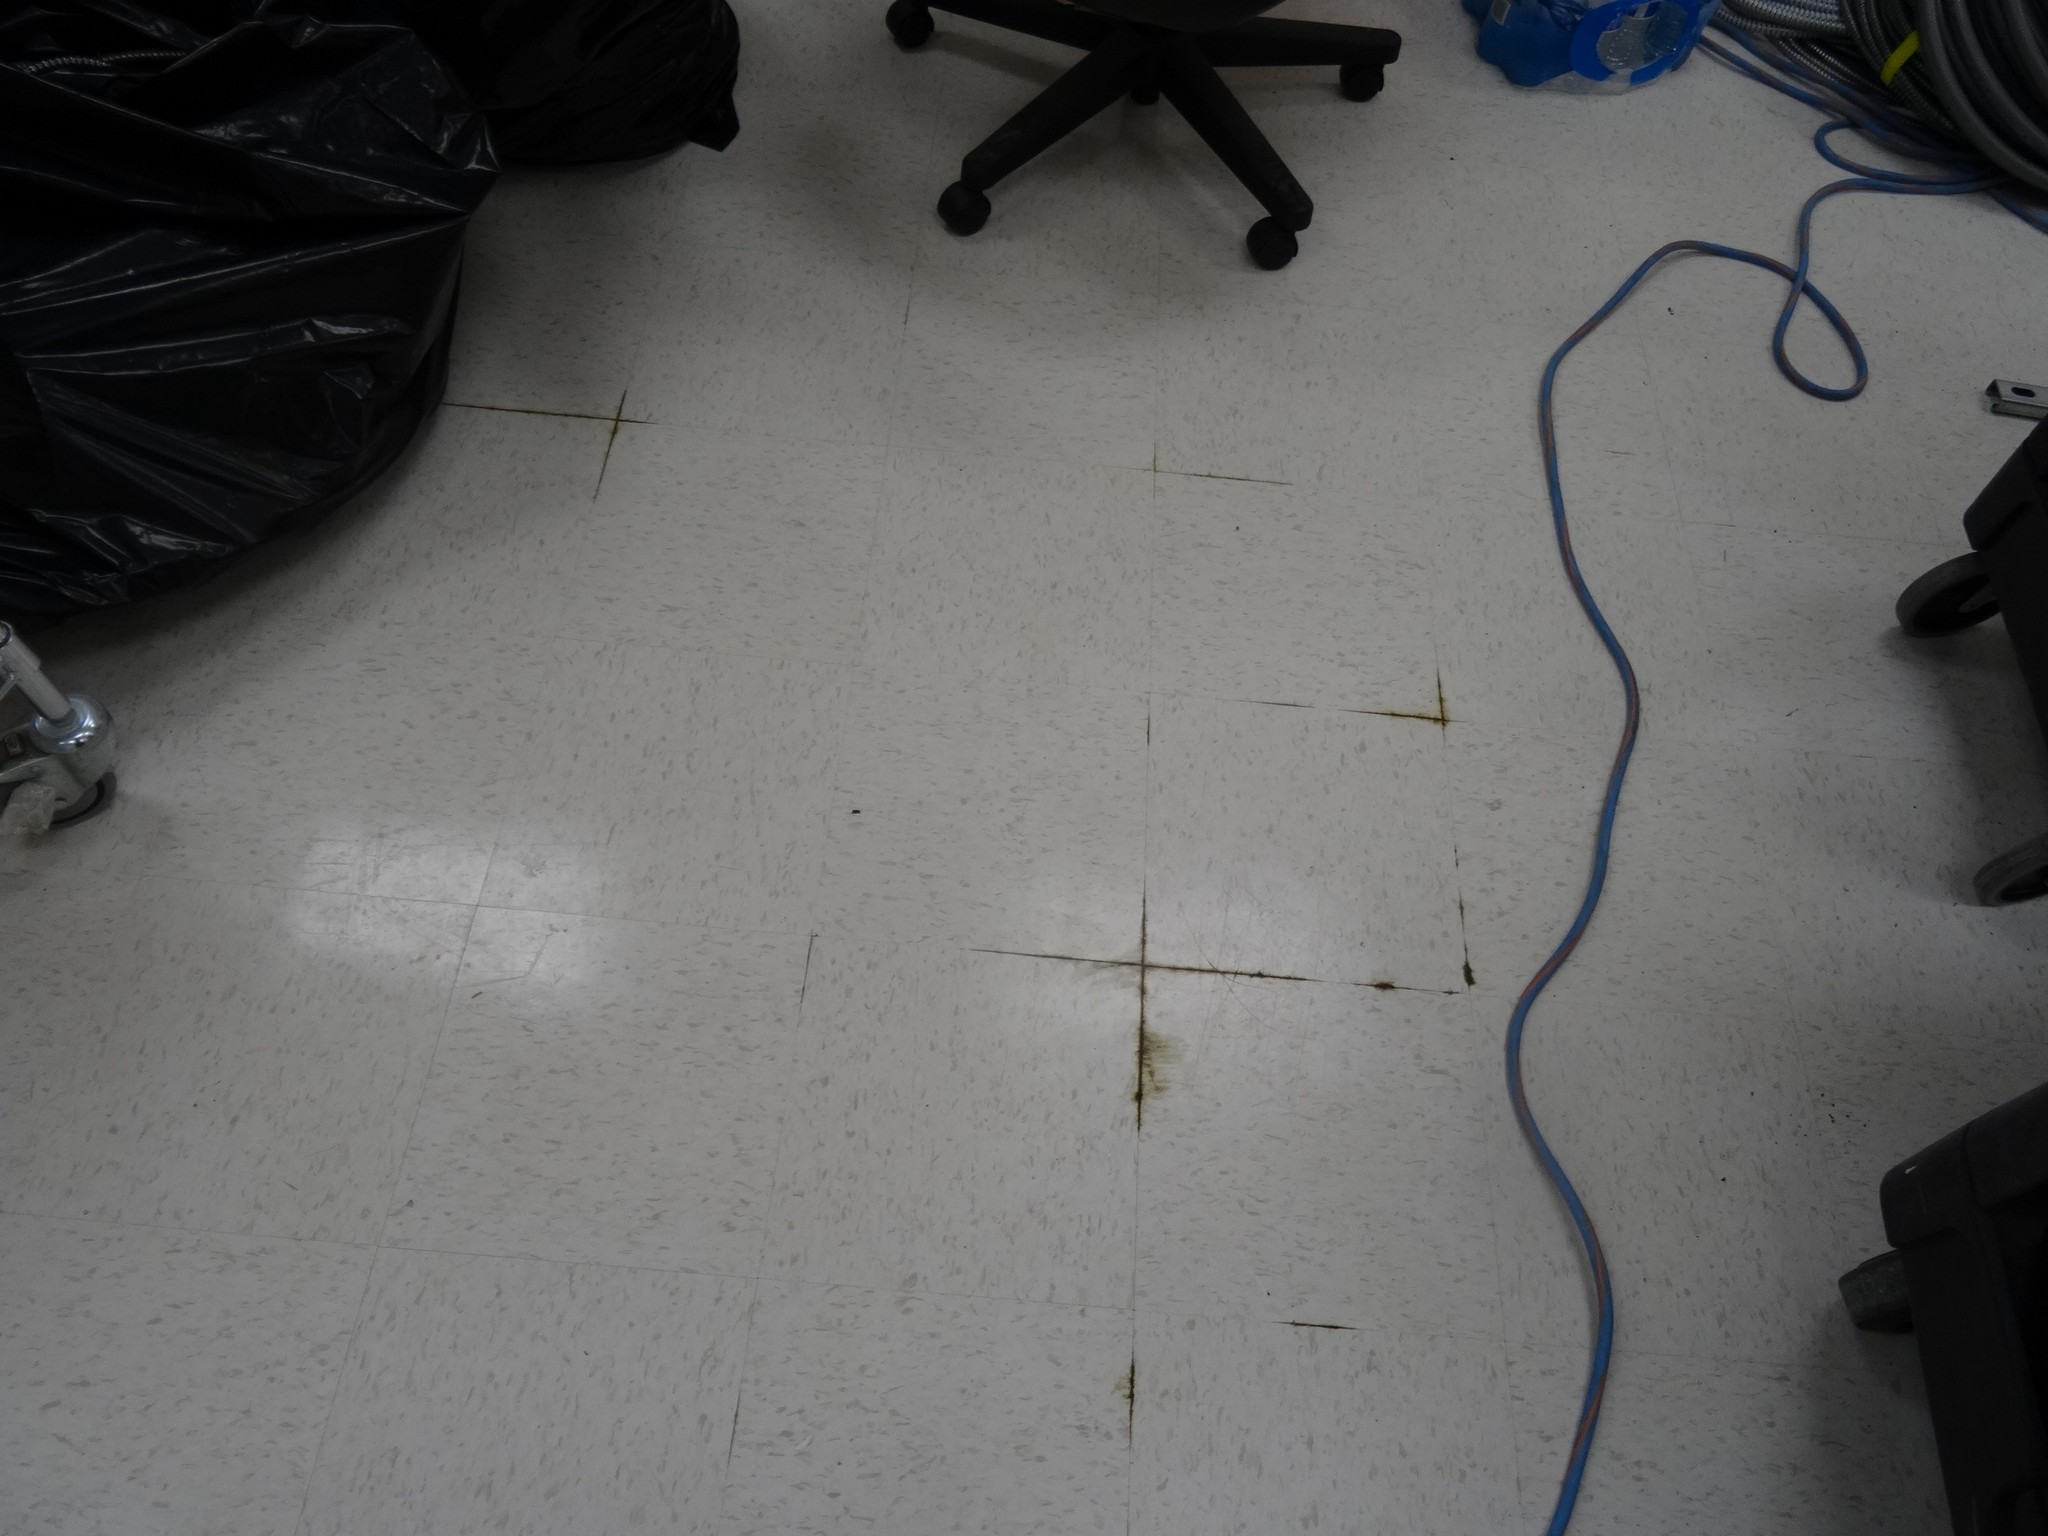 Seepage from beneath VCT flooring